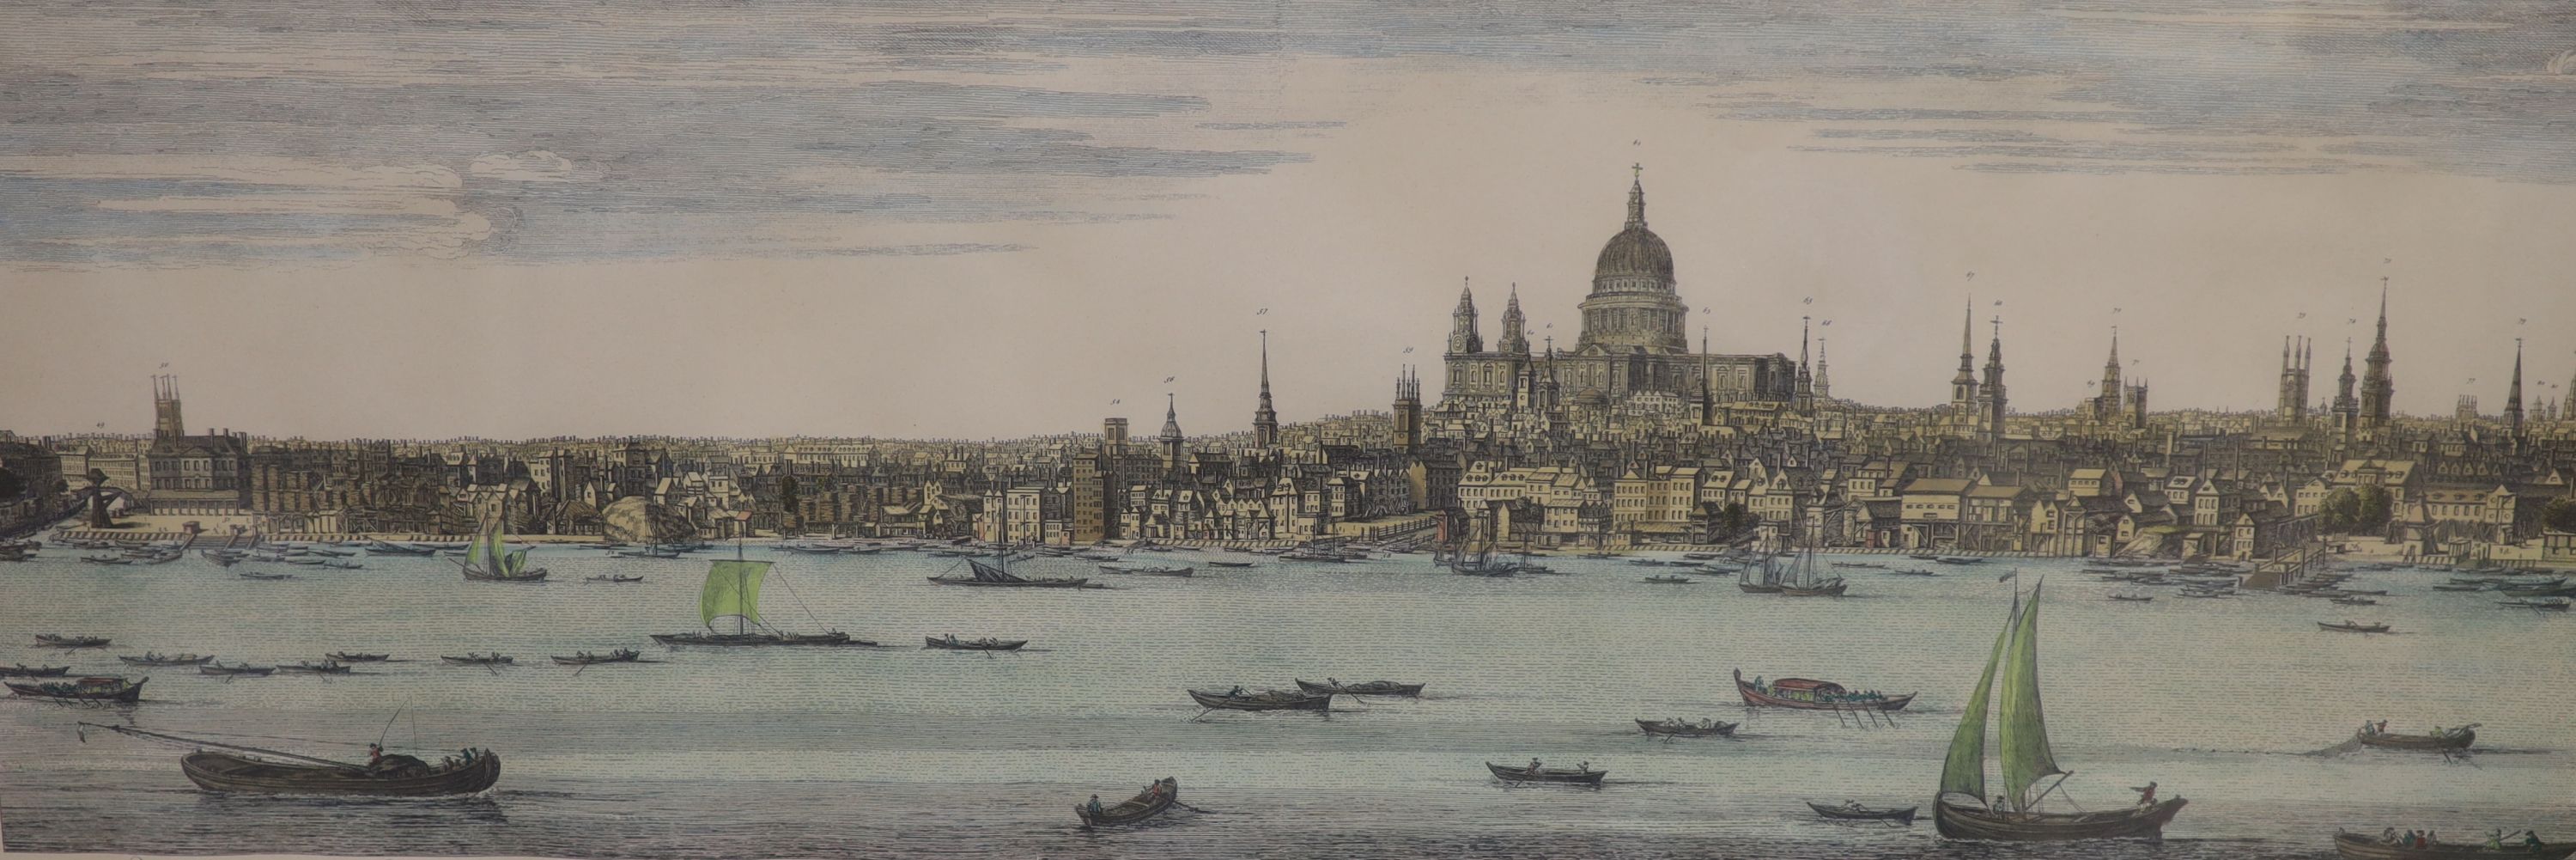 A set of 4 colour prints after S & N Buck, London viewed from The Thames, overall 32 x 81cm